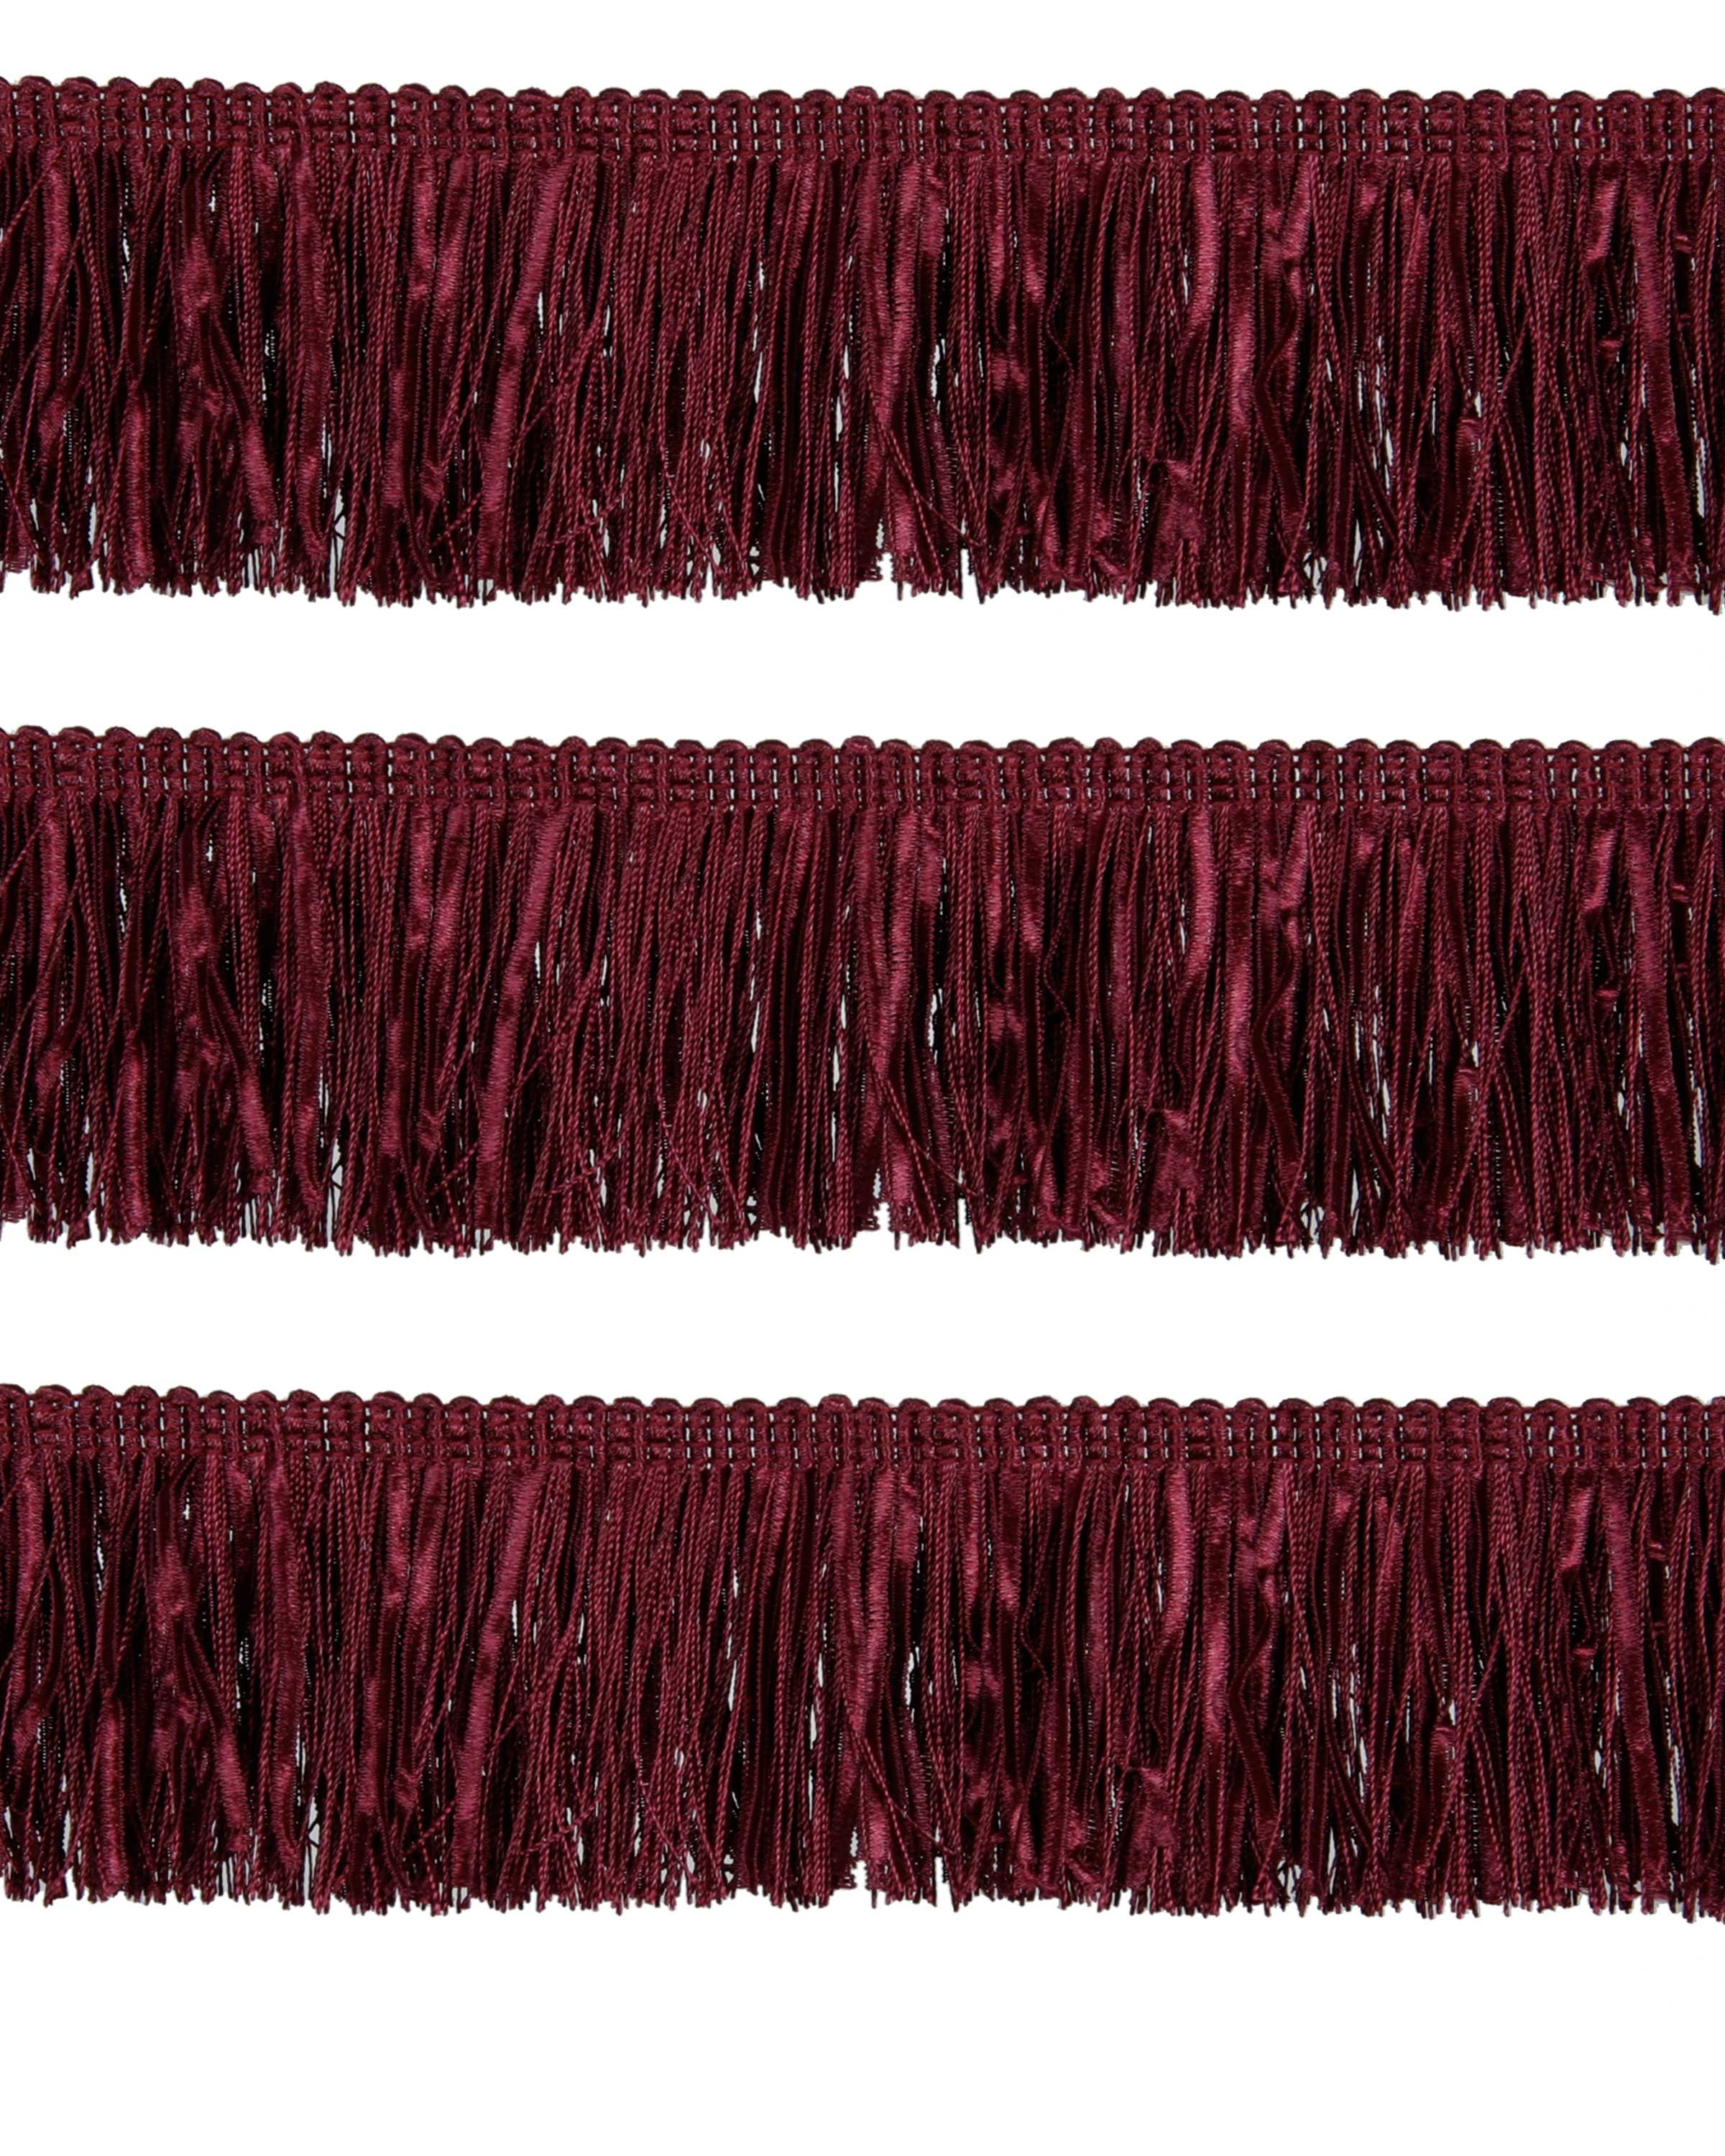 Bullion Fringe with Ribbons - Red Wine 60mm Price is for 5 metres